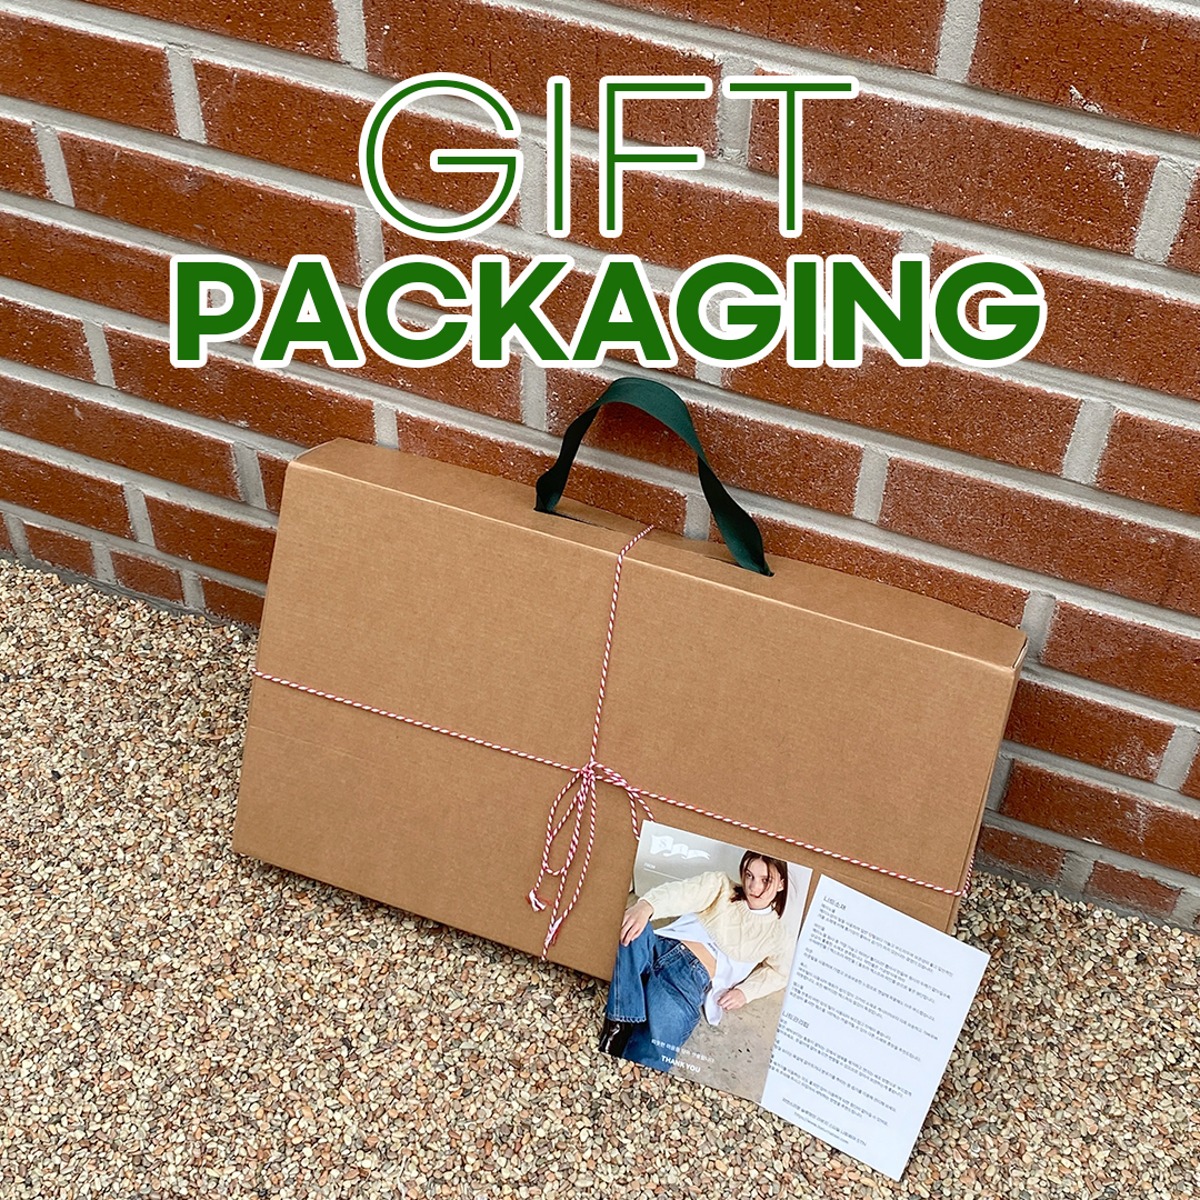 [With warm heart] Gift wrapping service.